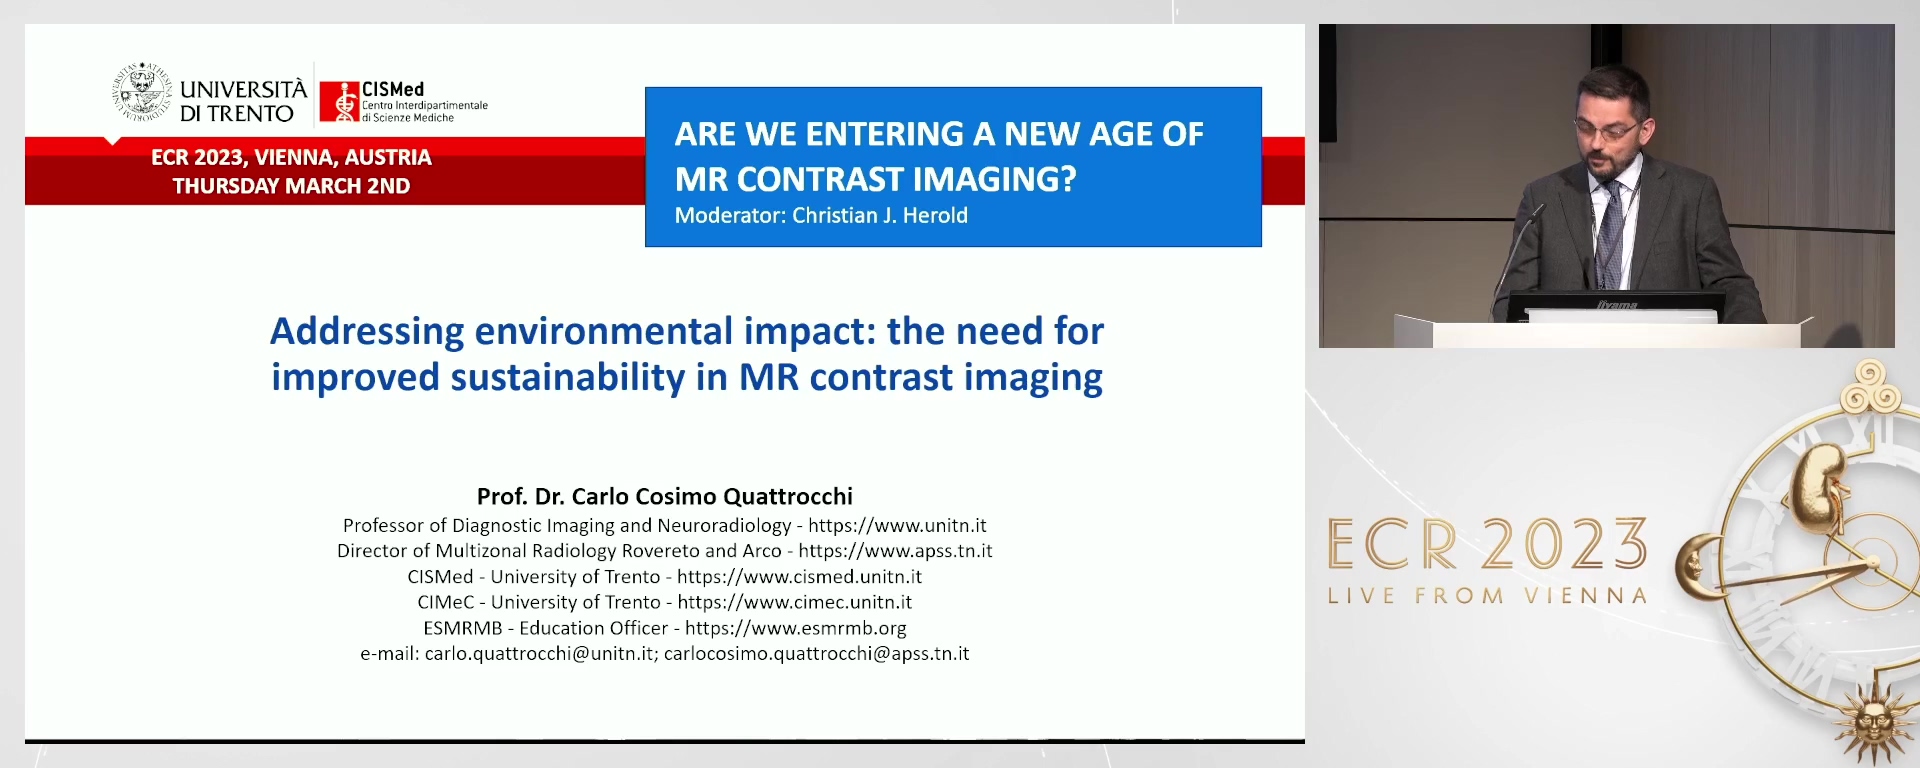 Addressing environmental impact: the need for improved sustainability in MR contrast imaging. - Carlo Cosimo Quattrocchi, Roma / IT